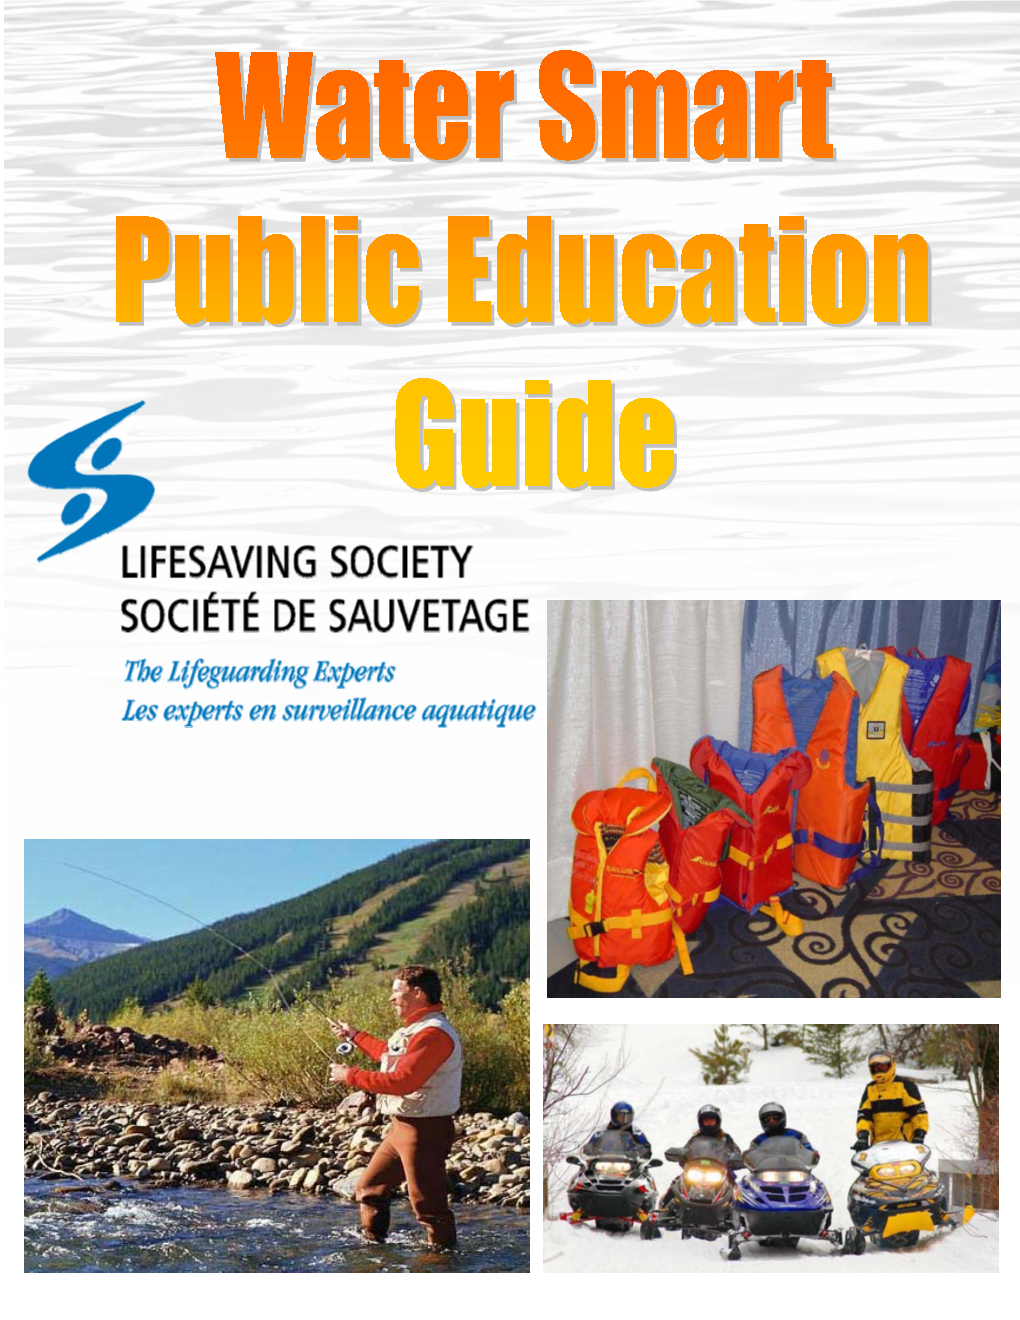 Water Smart® Public Education Guide Is Broken Down Into Different Water Safety Themes, Each with Different Activities for Both Children and Adults